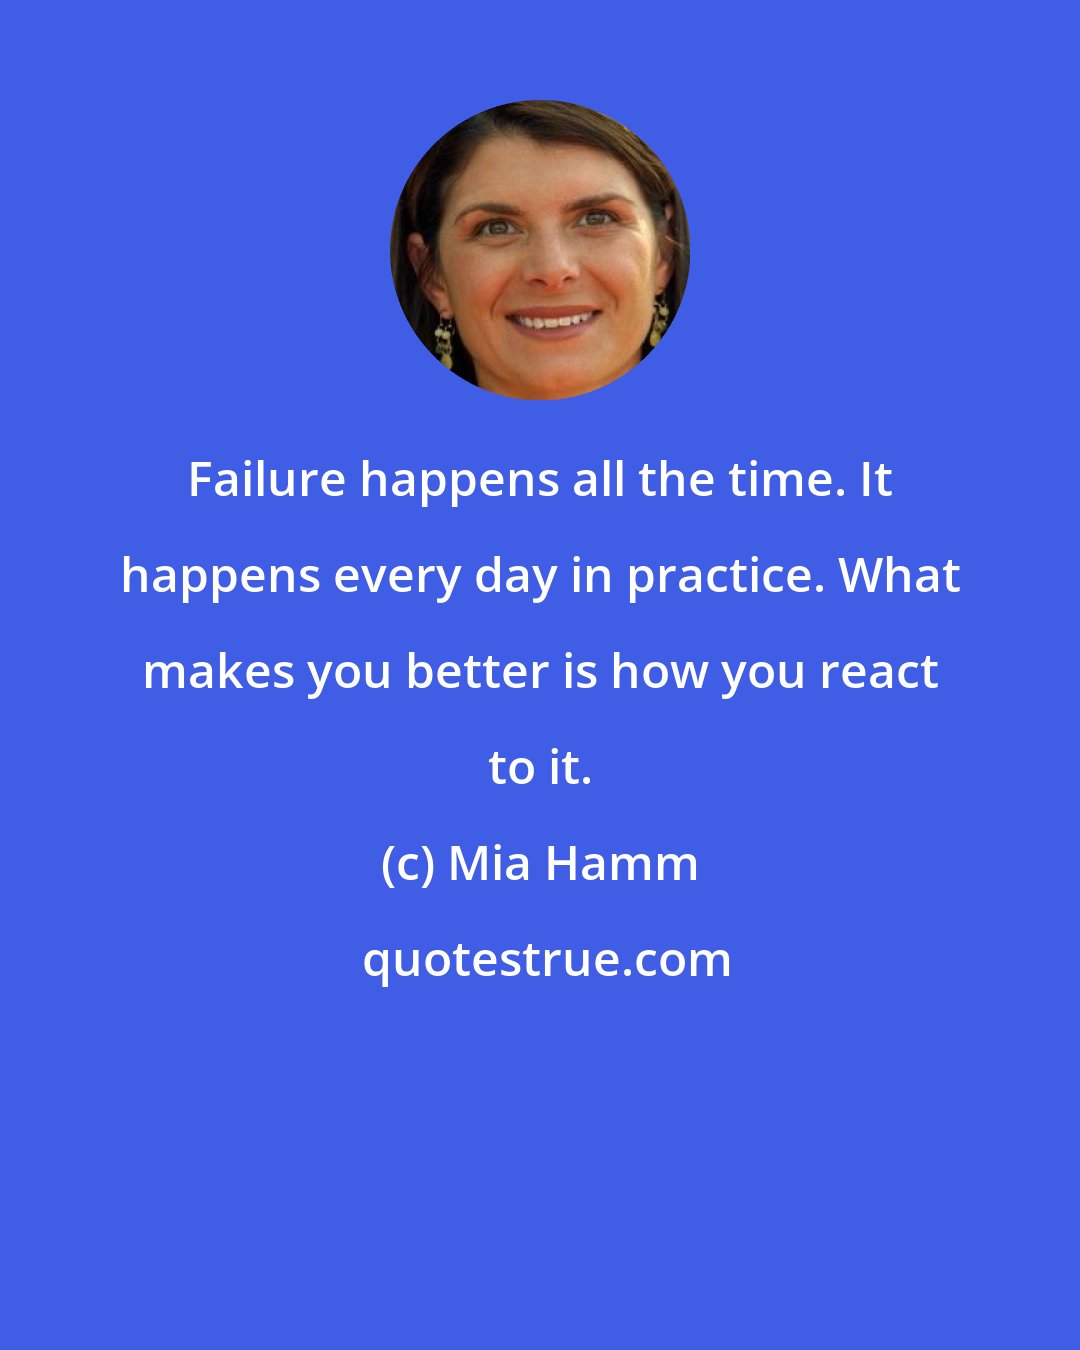 Mia Hamm: Failure happens all the time. It happens every day in practice. What makes you better is how you react to it.